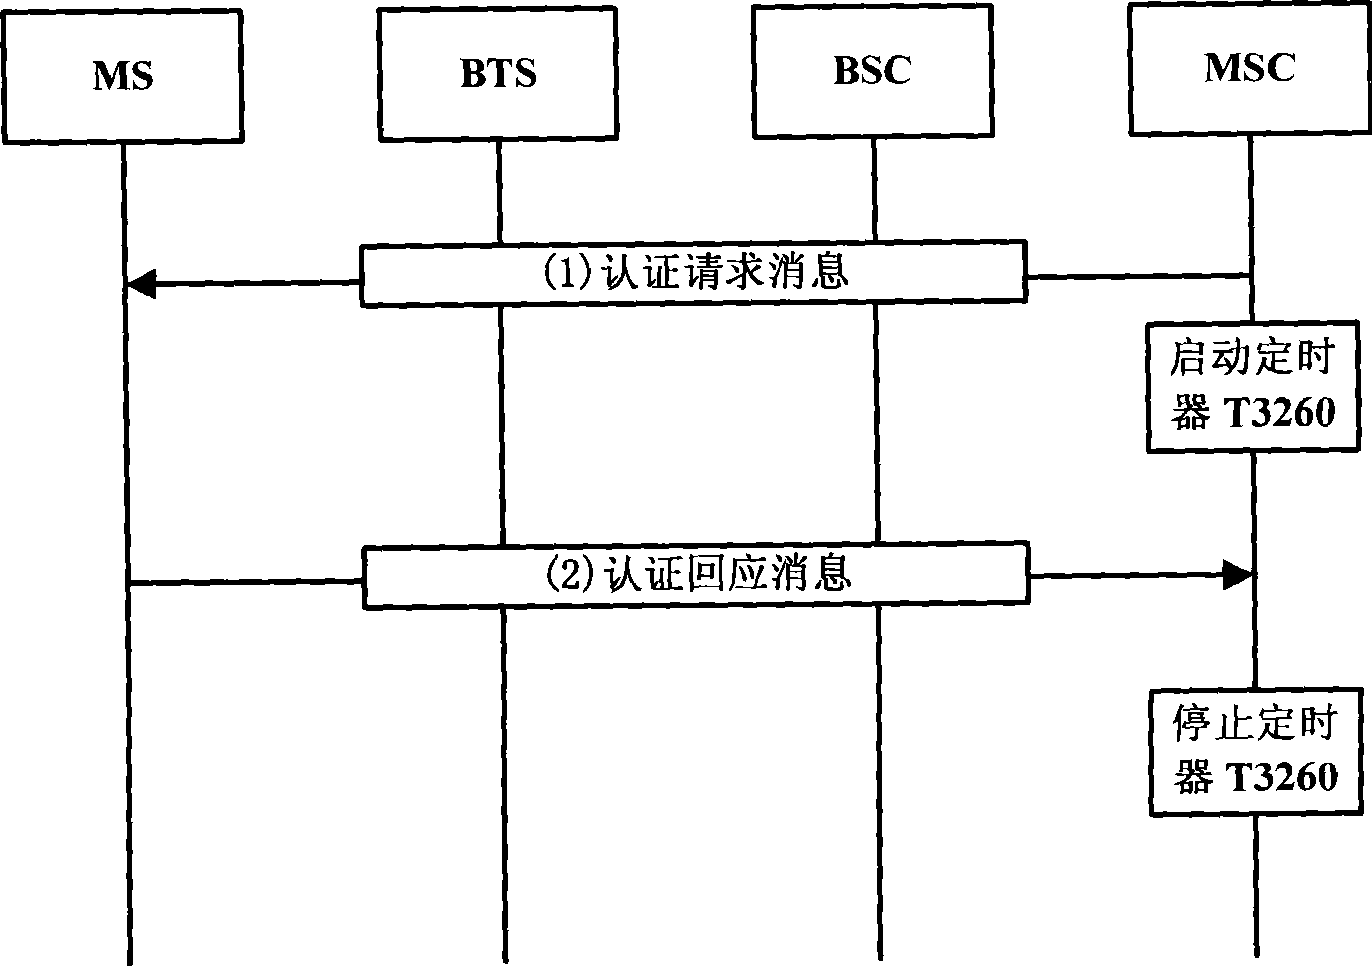 Wireless channel switching method and system therefor